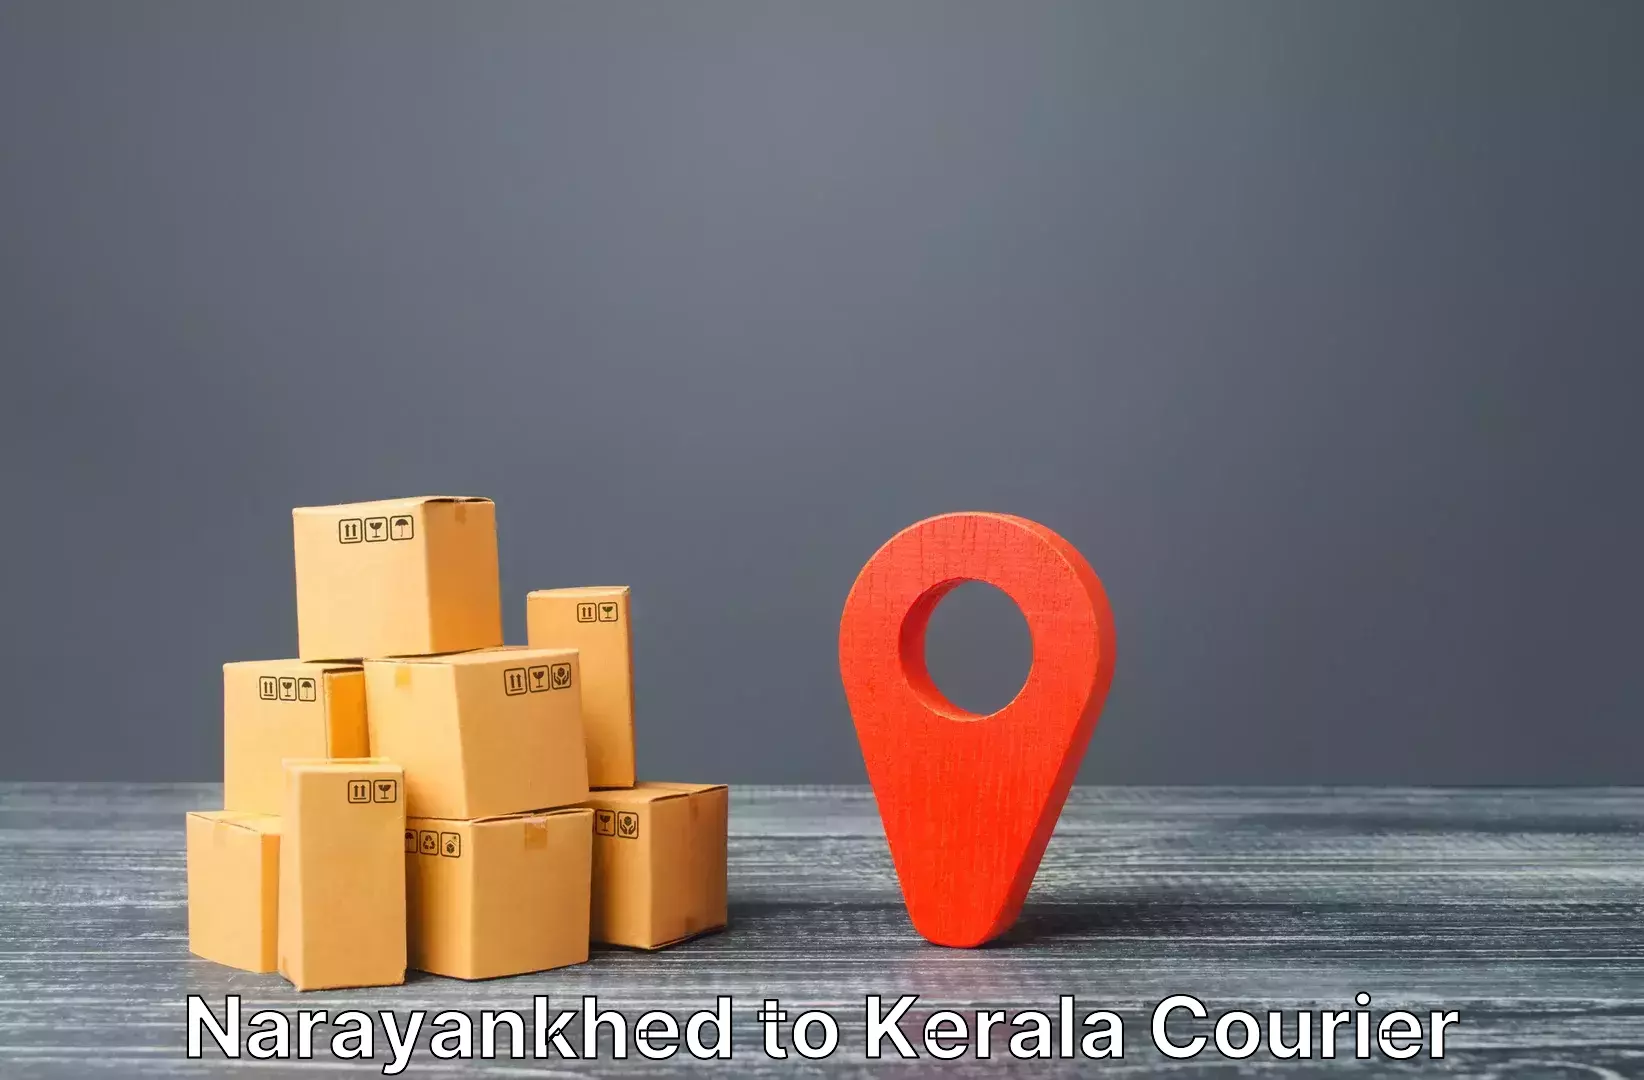 Luggage delivery app Narayankhed to Kodungallur